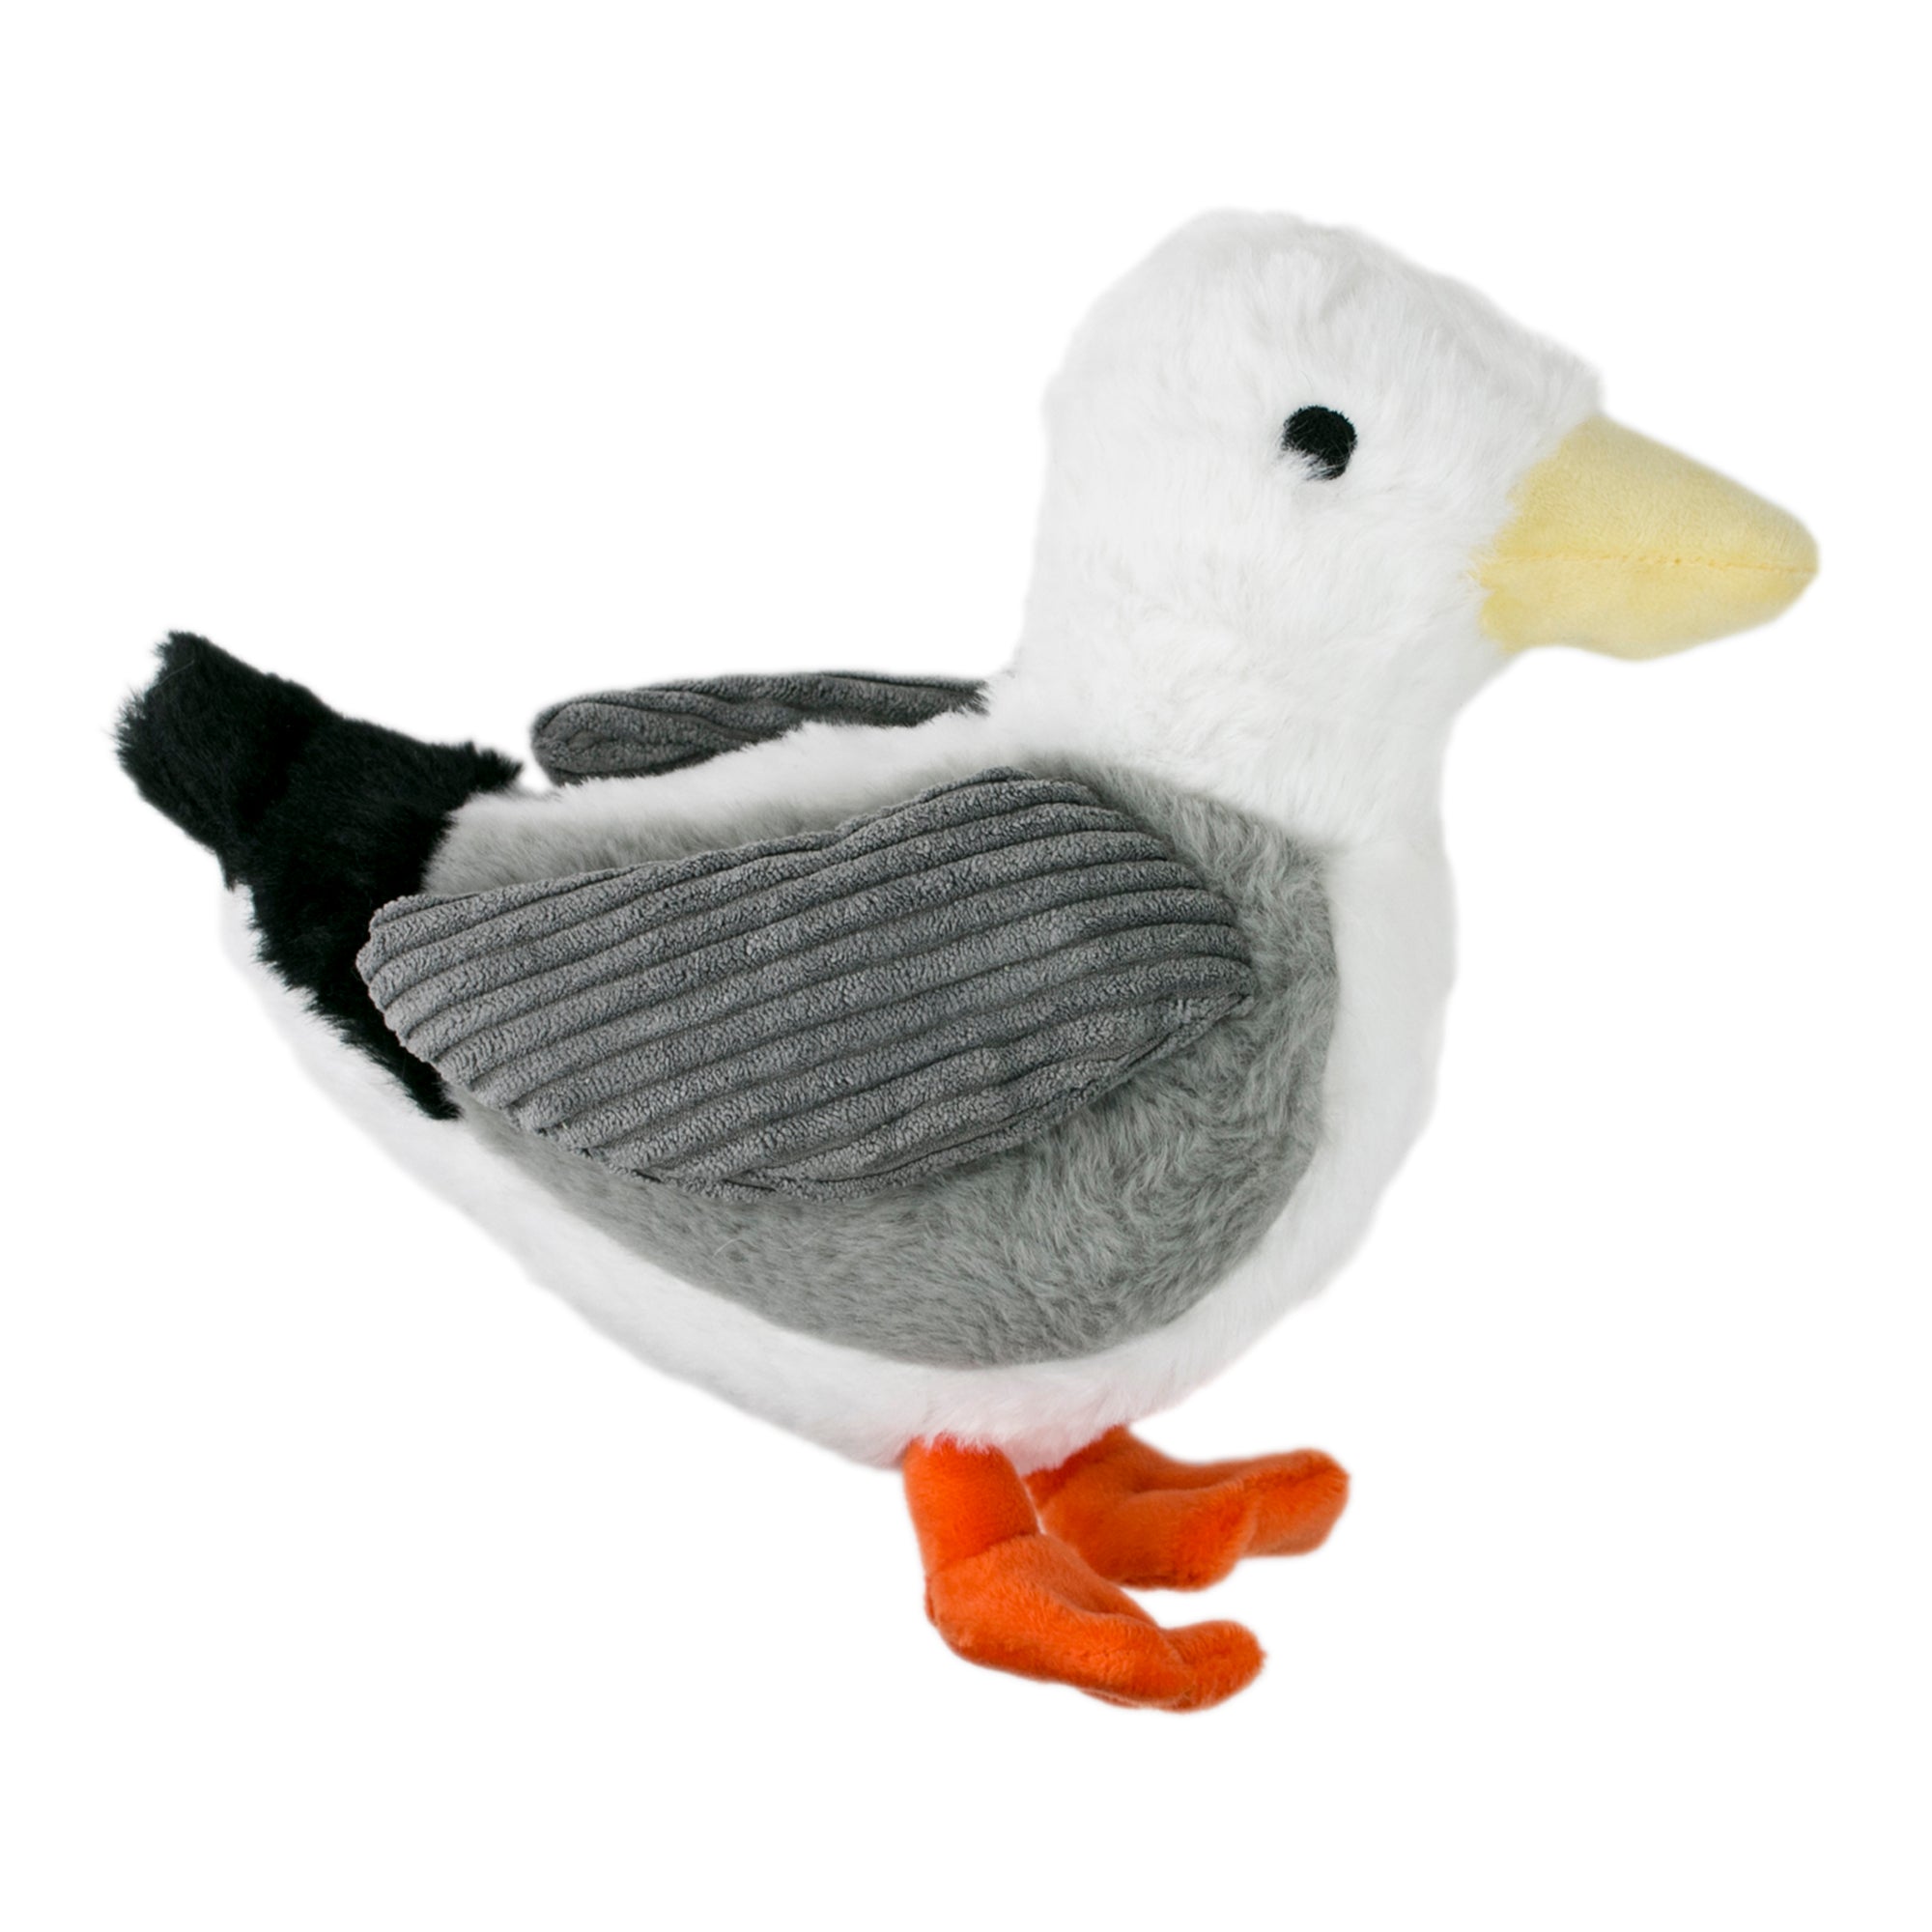 Squeaky Plush Dog Toy: Animated Seagull